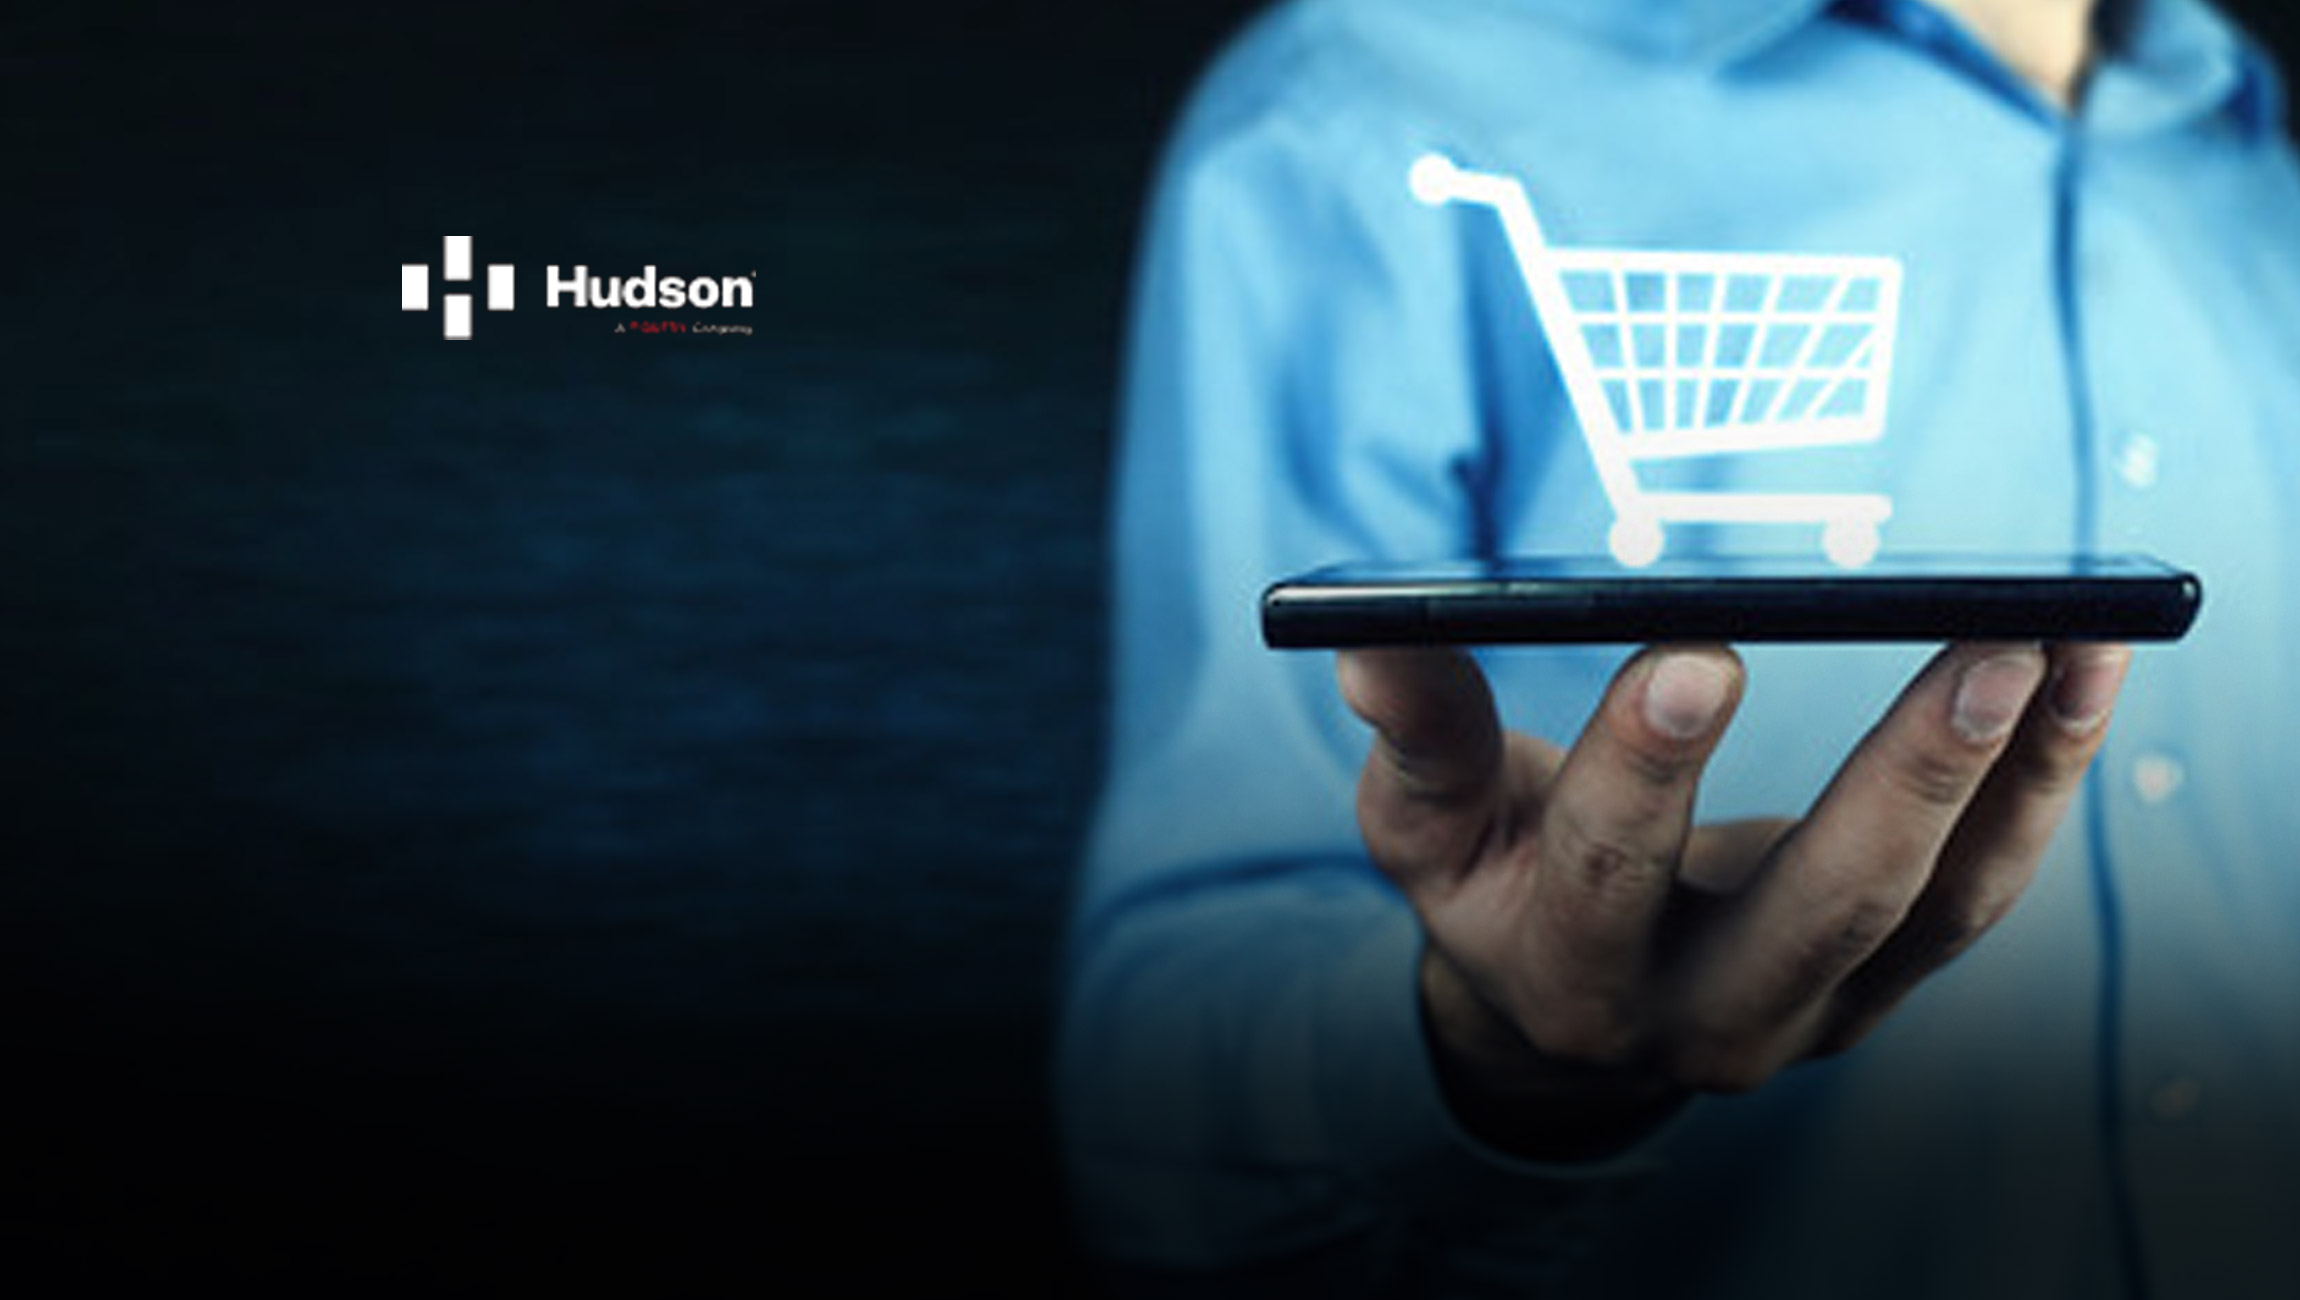 Hudson Advances Digital Growth Strategy With Plans to Open Stores Using Amazon’s Just Walk Out Technology